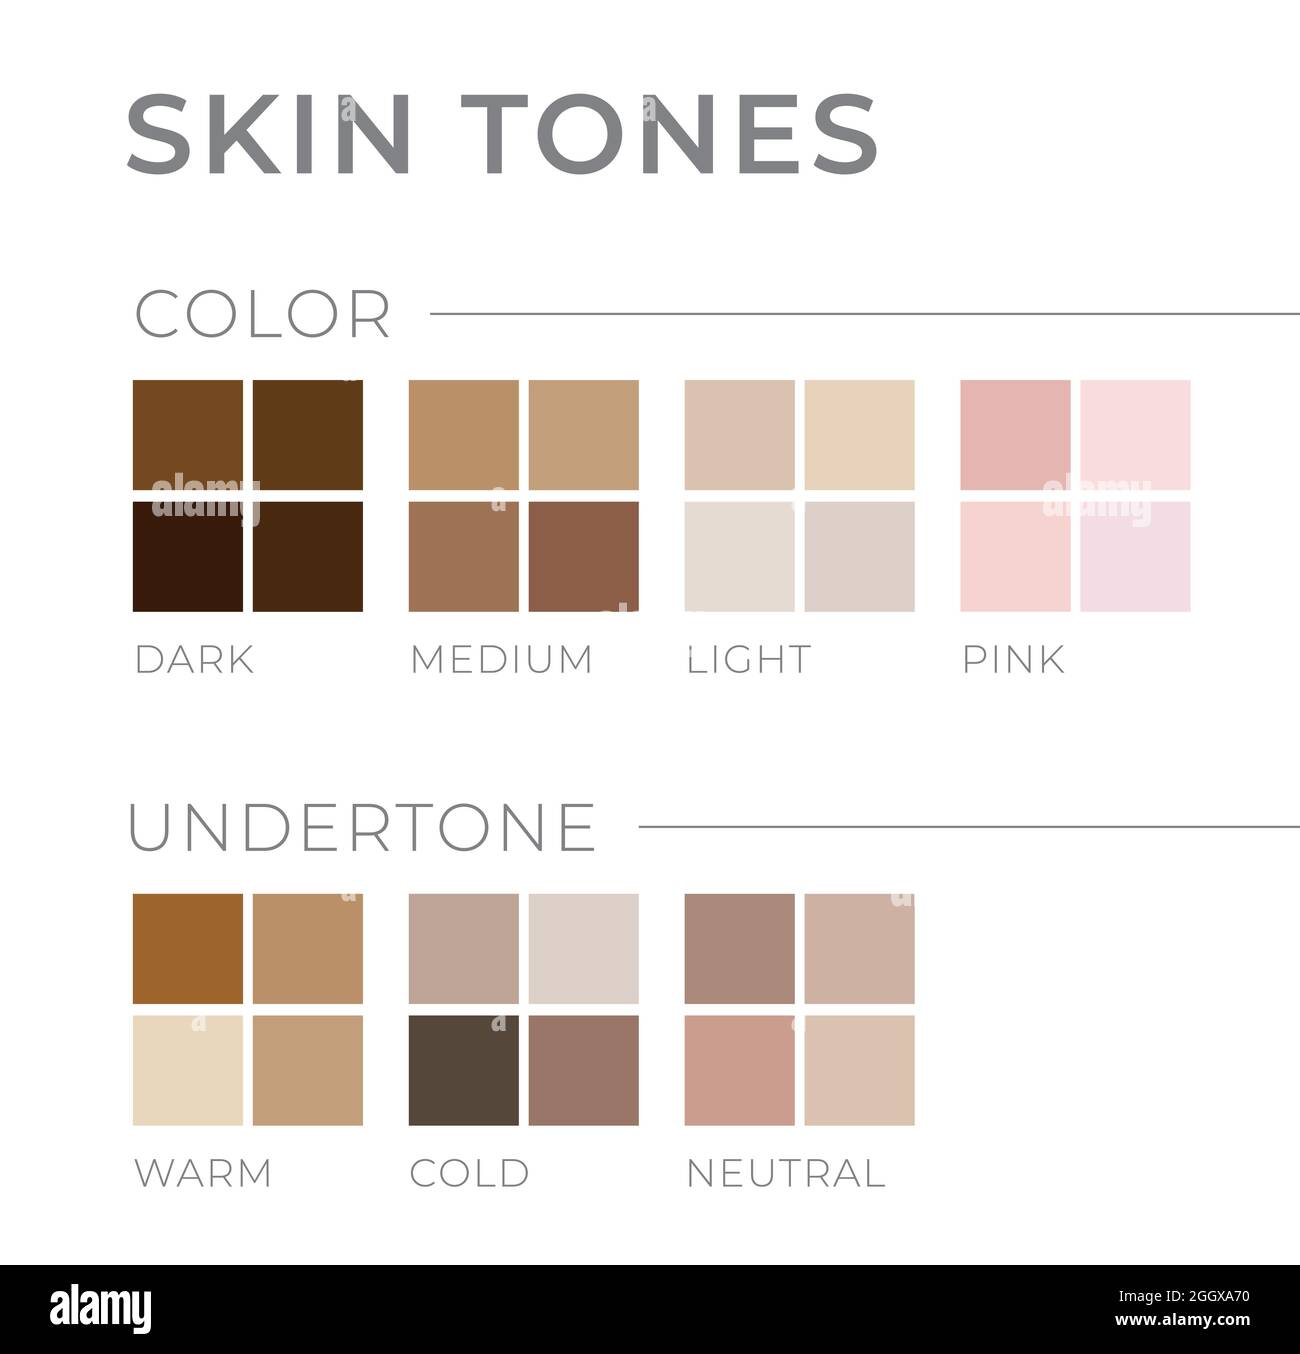 Skin tones with Undertone. Warm, Cold, Neutral Skin Colors Stock Vector  Image & Art - Alamy